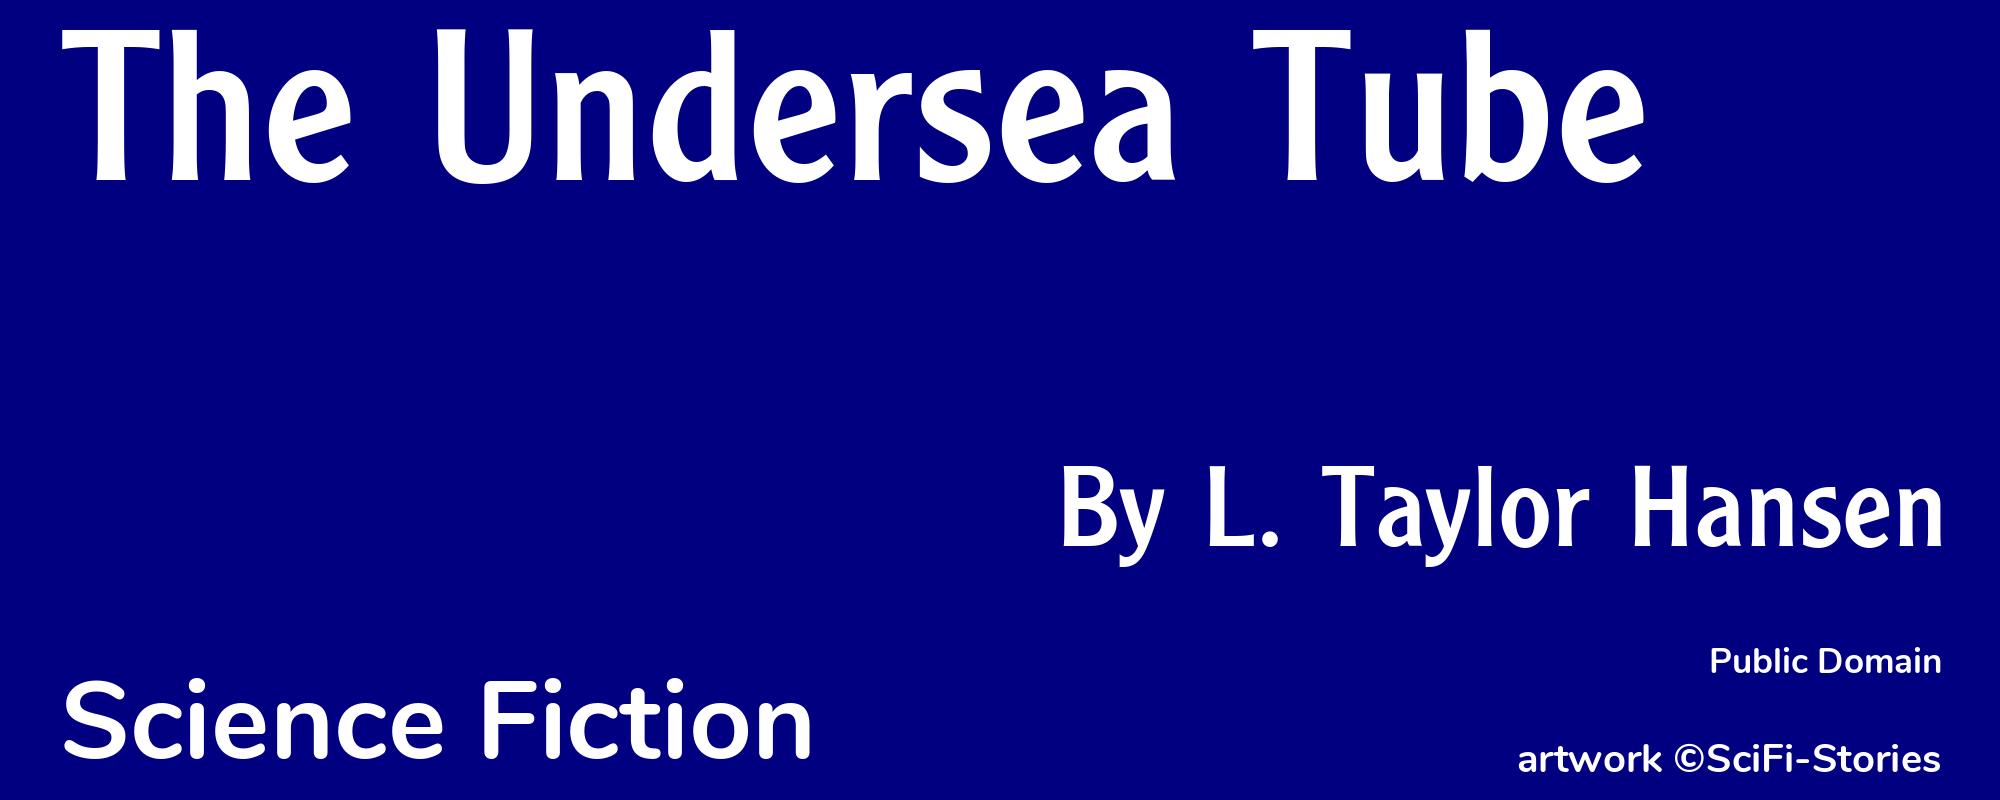 The Undersea Tube - Cover